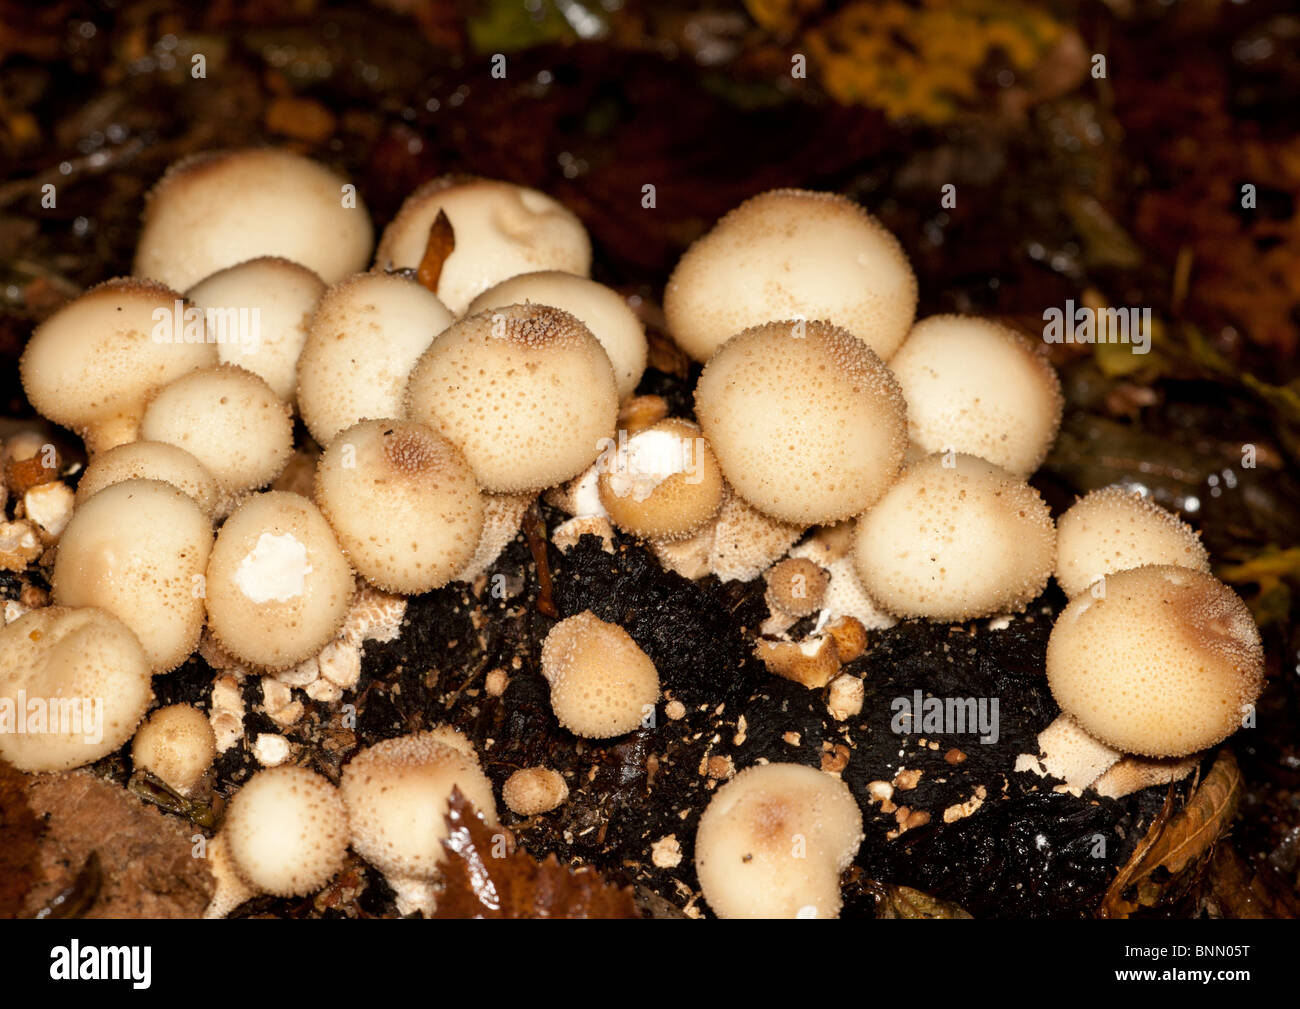 Group of Common Puffball fungi growing in Epping Forest Stock Photo